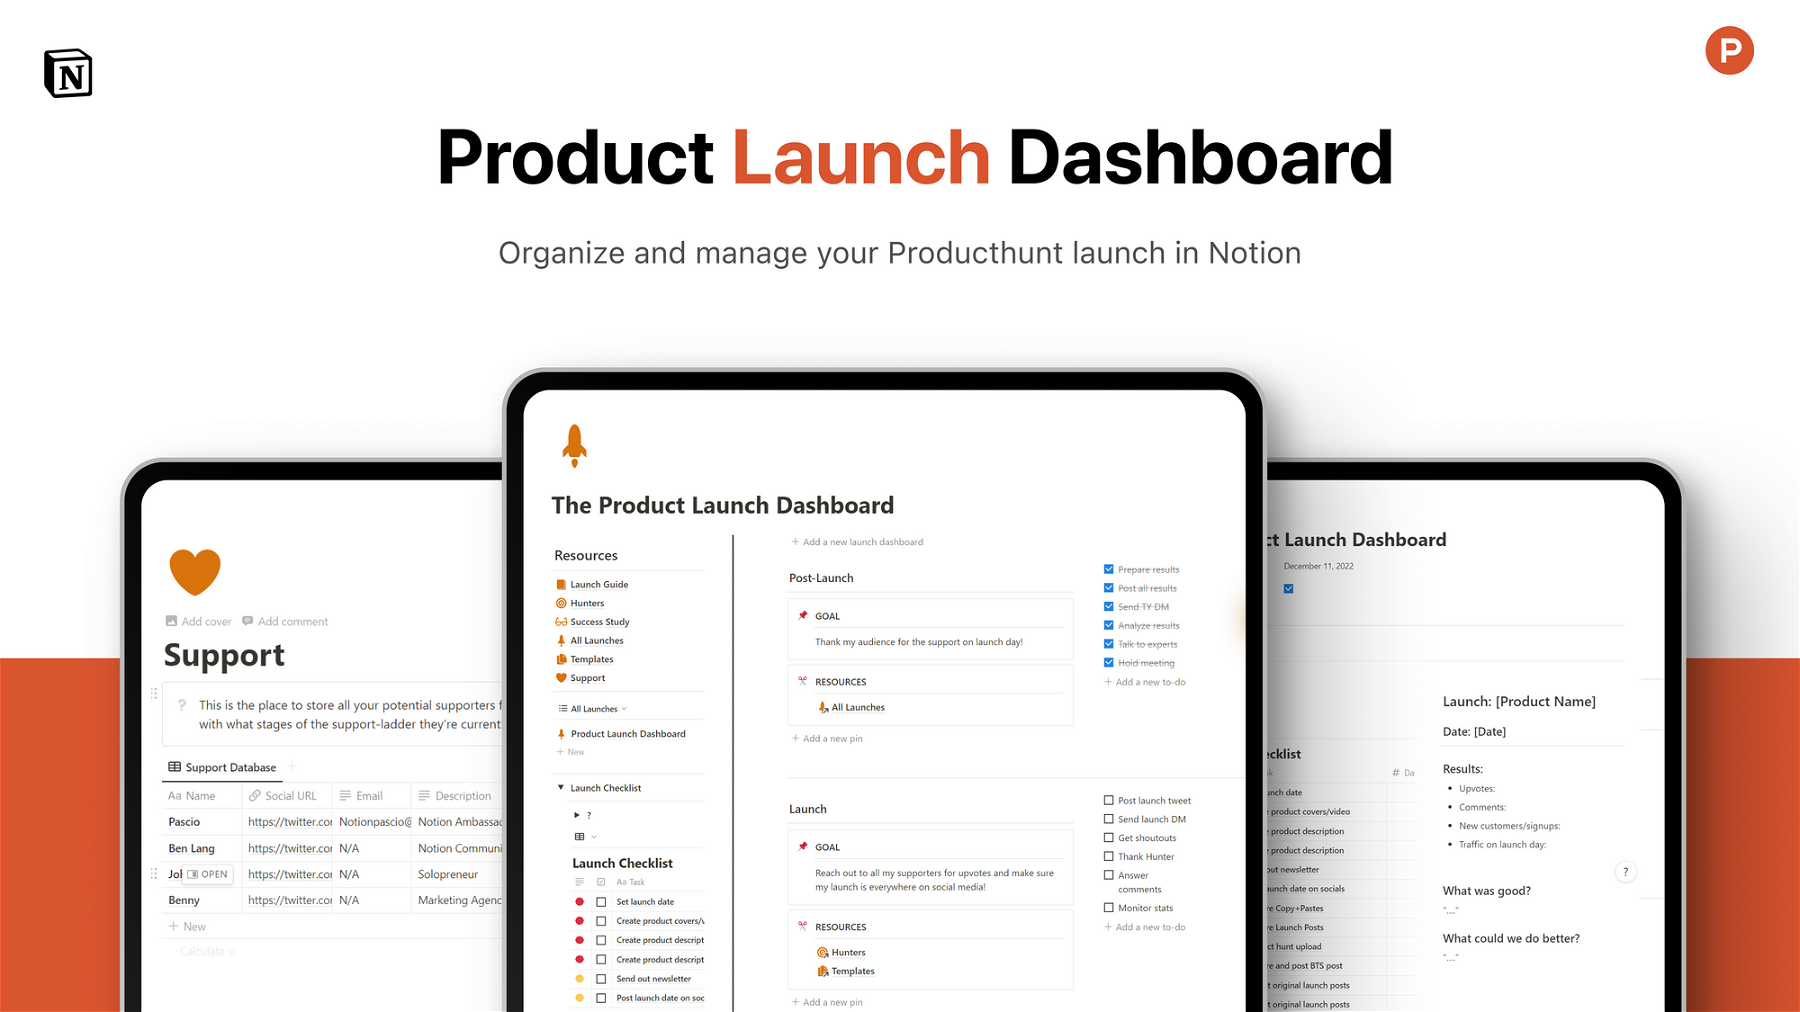 The Ultimate Product Launch Dashboard